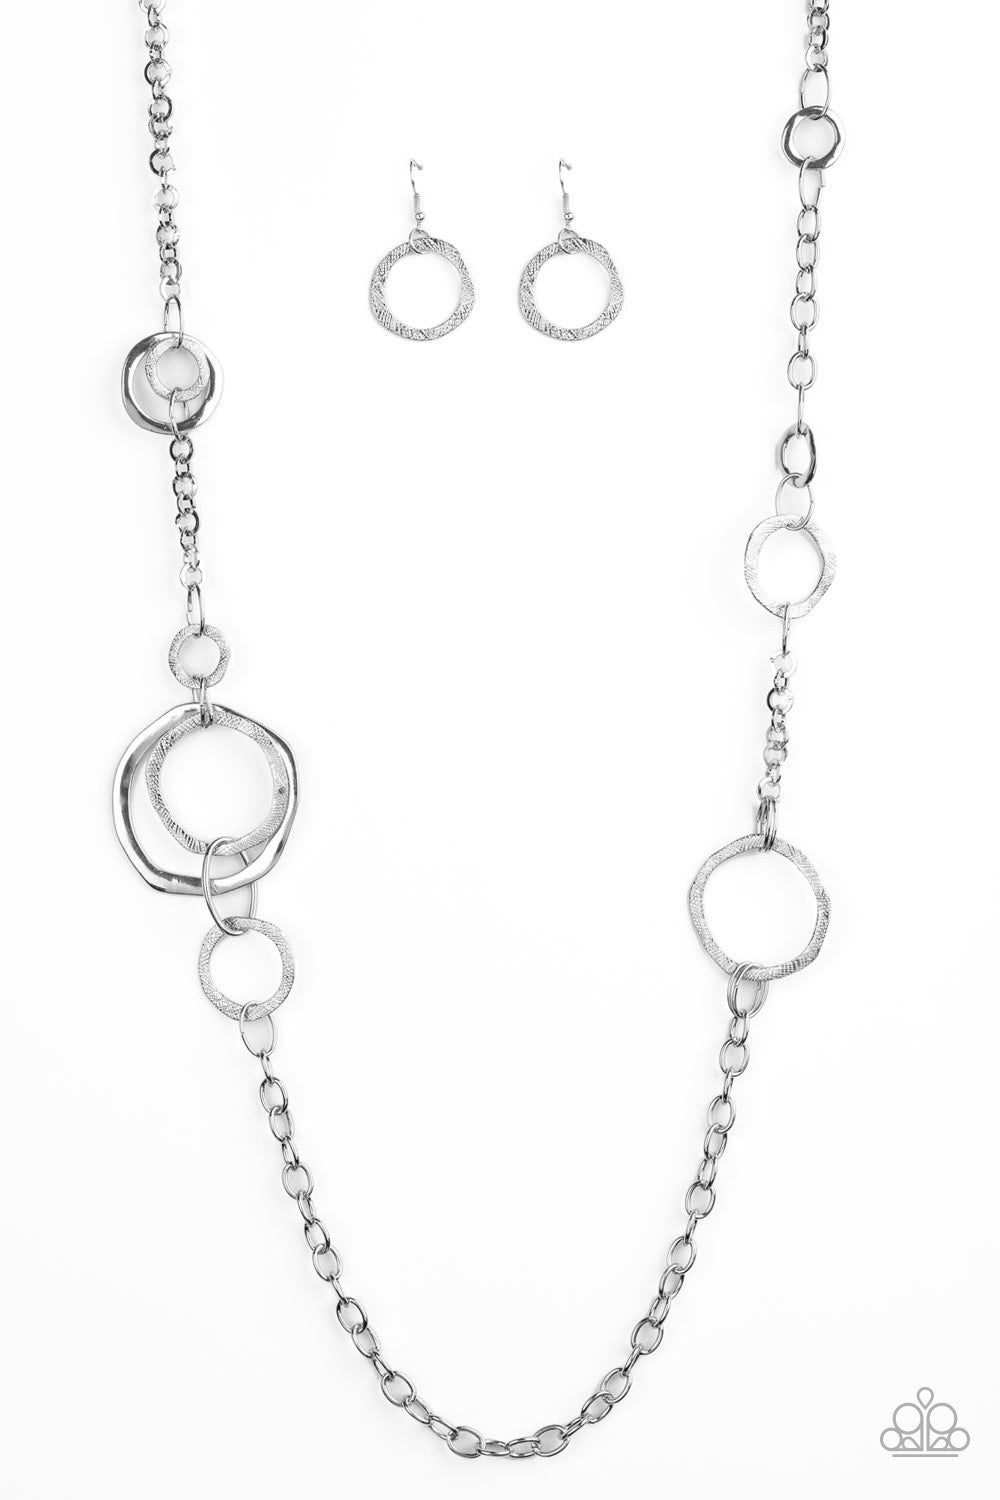 Paparazzi Necklaces - Amped Up Metallics - Silver